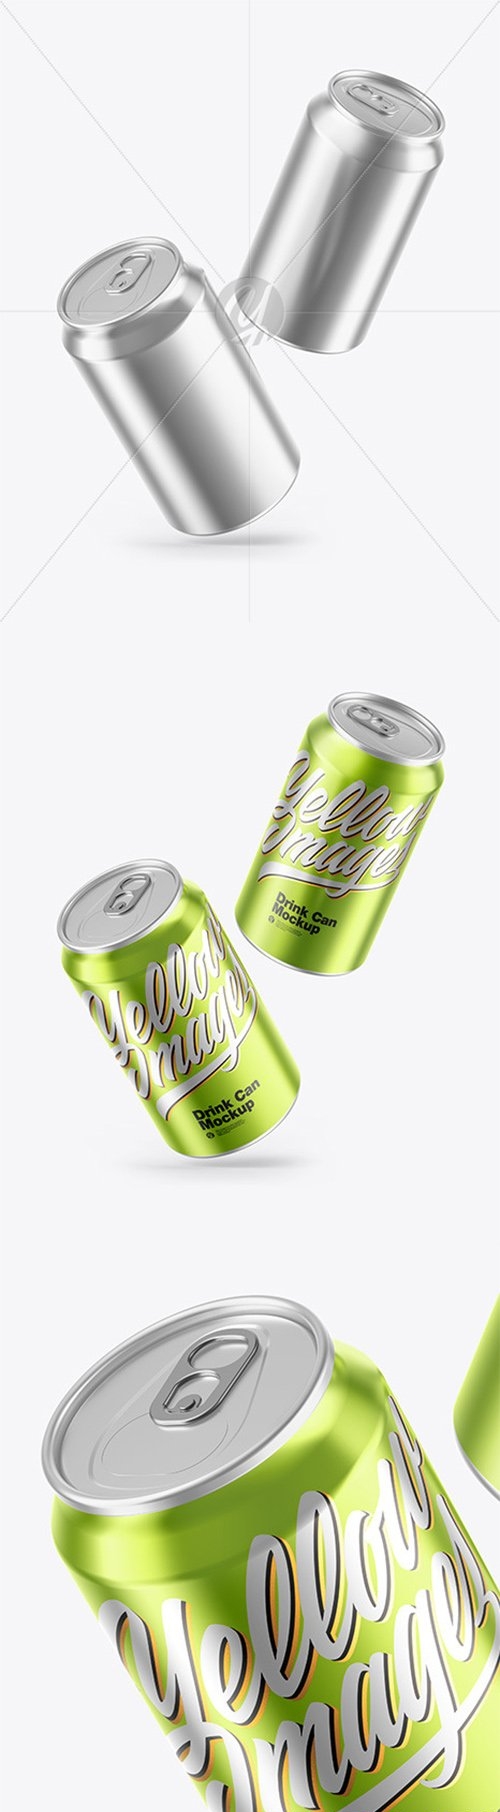 Glossy Metallic Drink Cans Mockup 66564